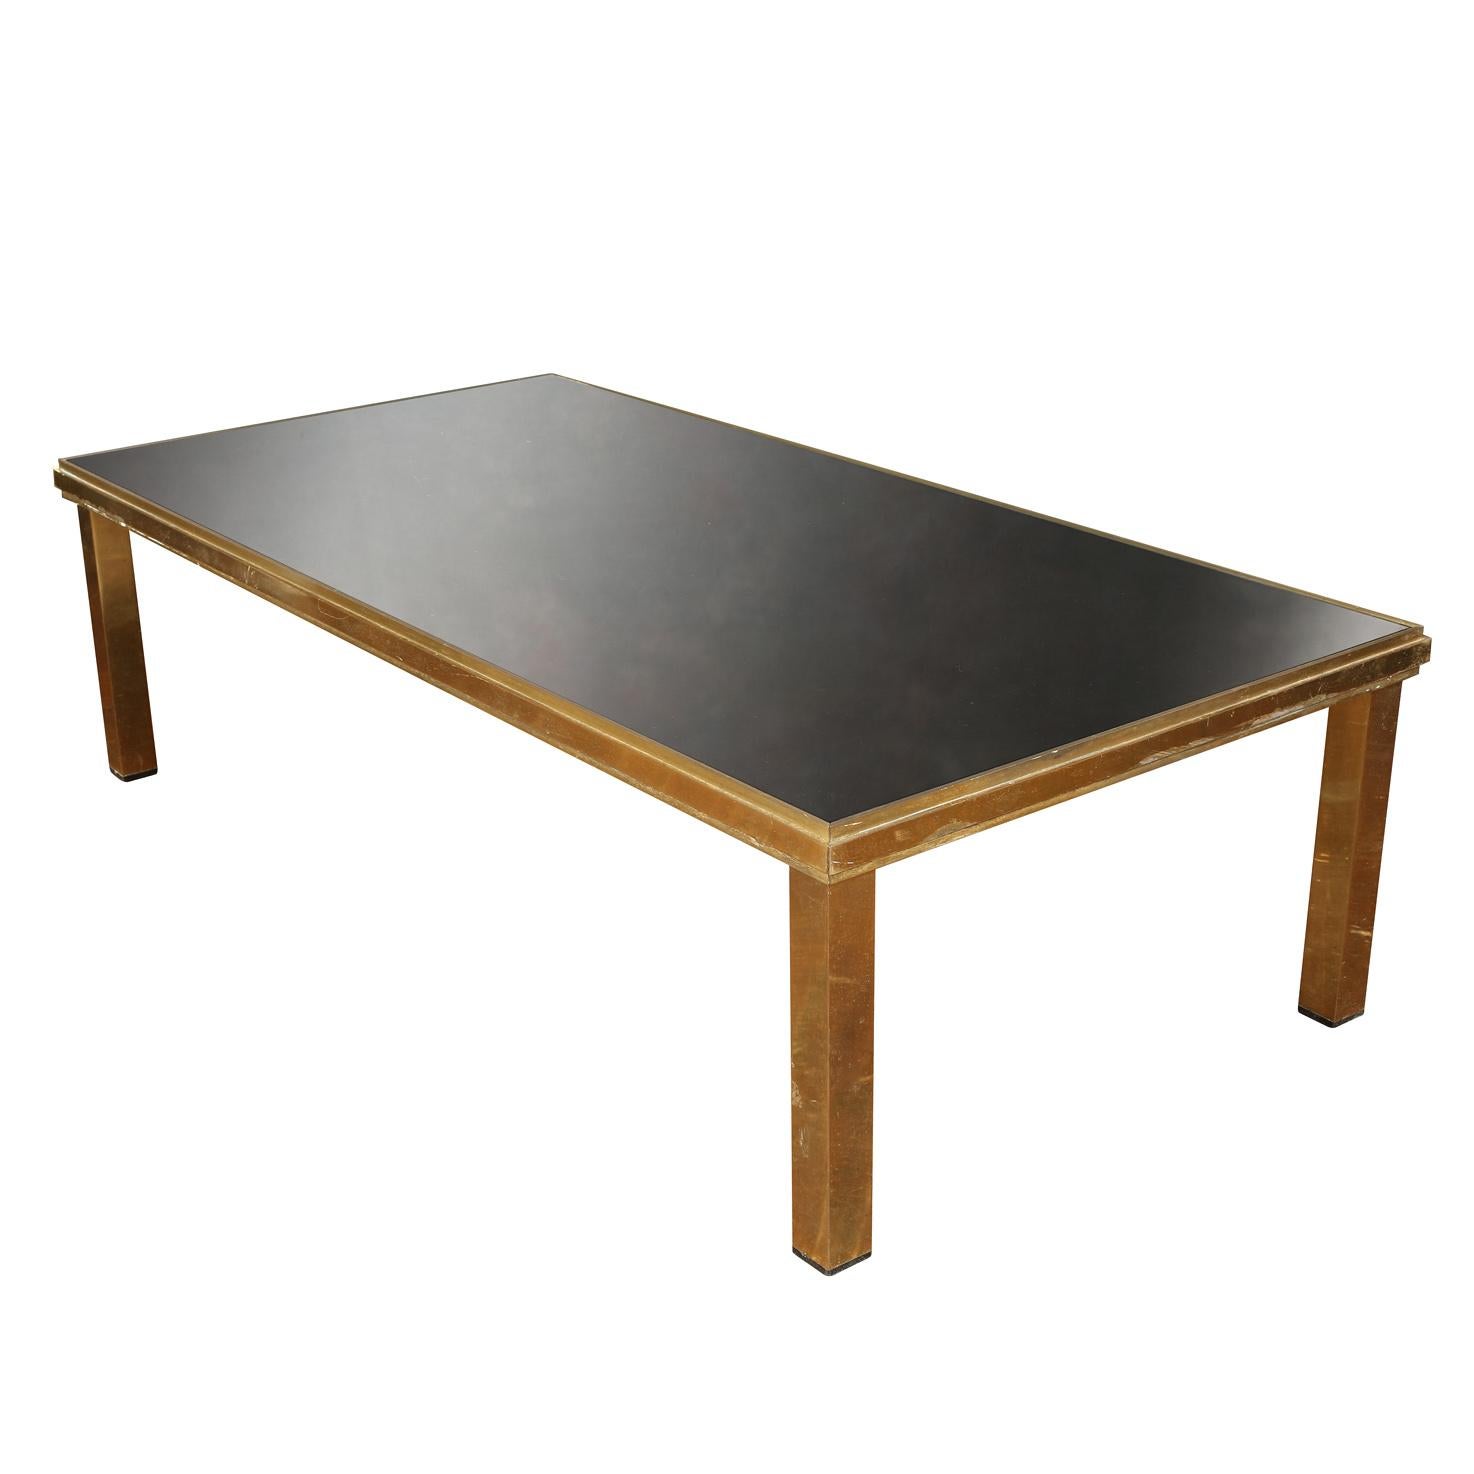 Vintage brass Art Deco coffee table with black glass top with etched, square design.